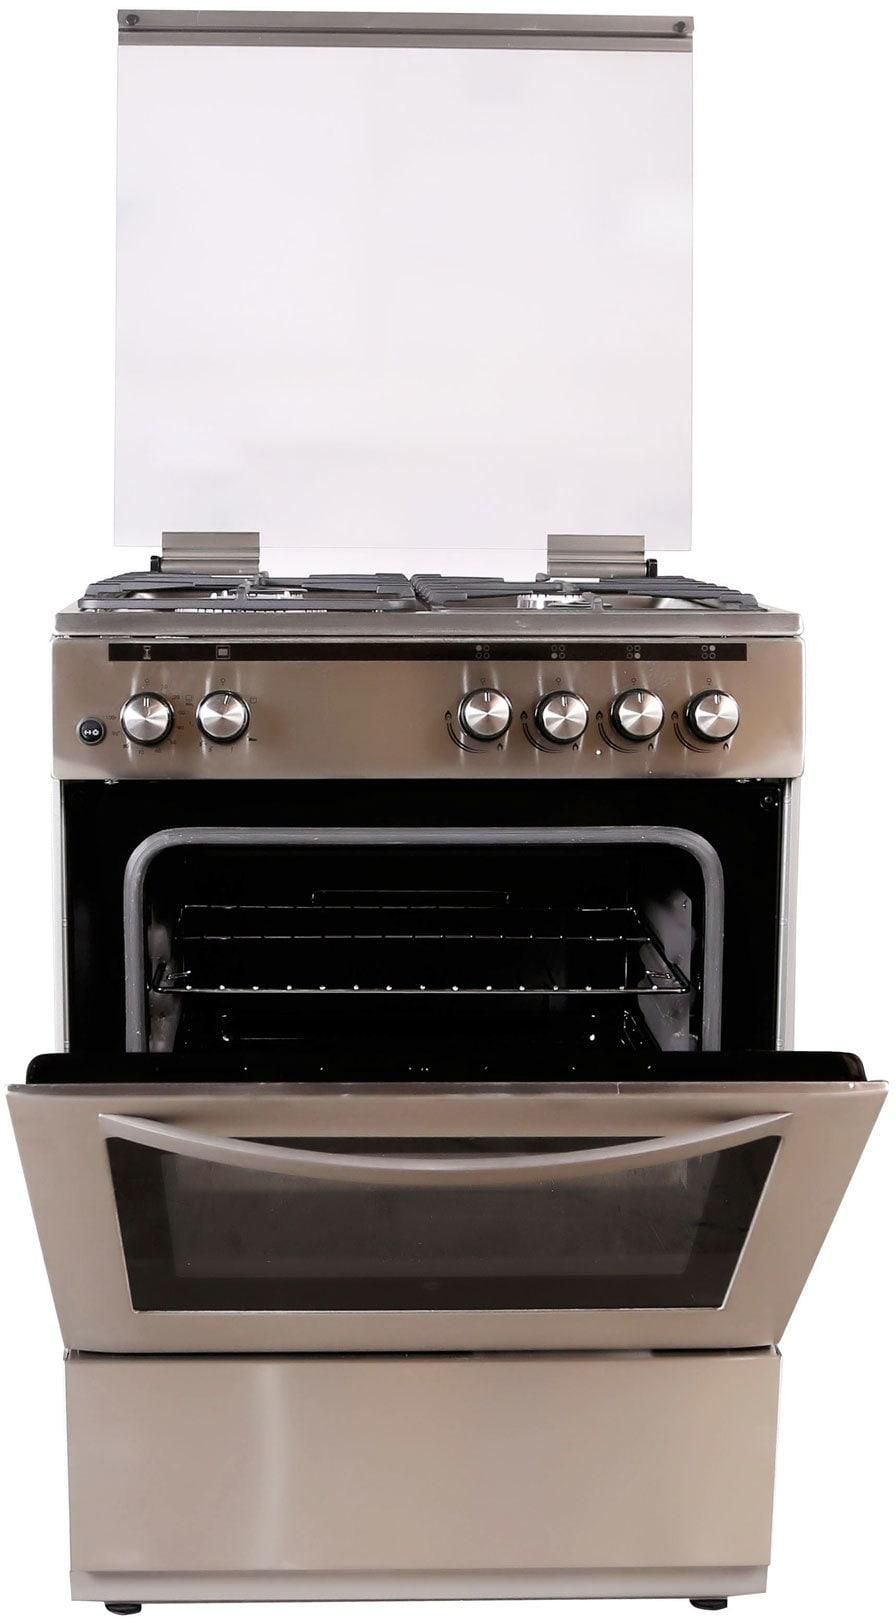 Hoover 4 Gas Burner Free Standing Gas Cooker FGC-66.02S Silver 60x60cm